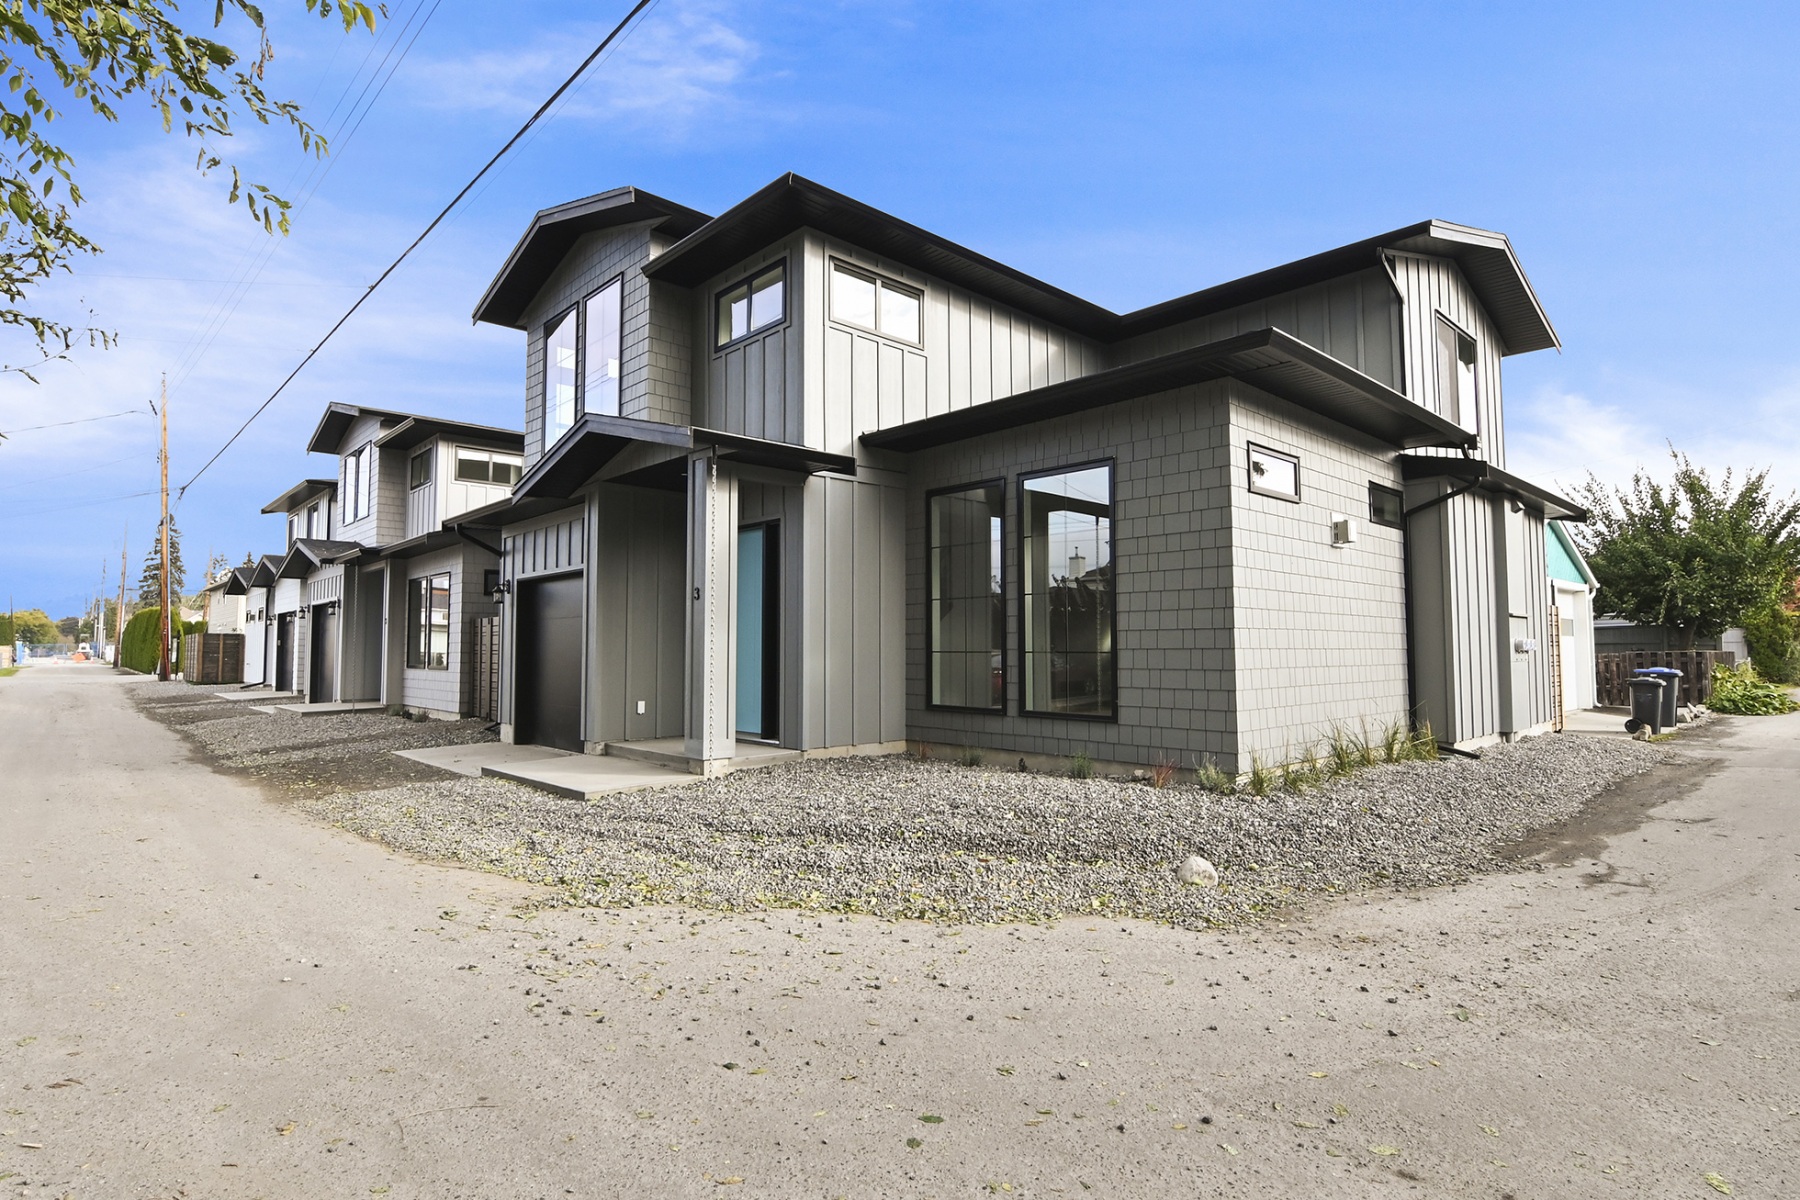 1_harmony_homes_patterson_ave_infill_project_house_road_gallery_image_4